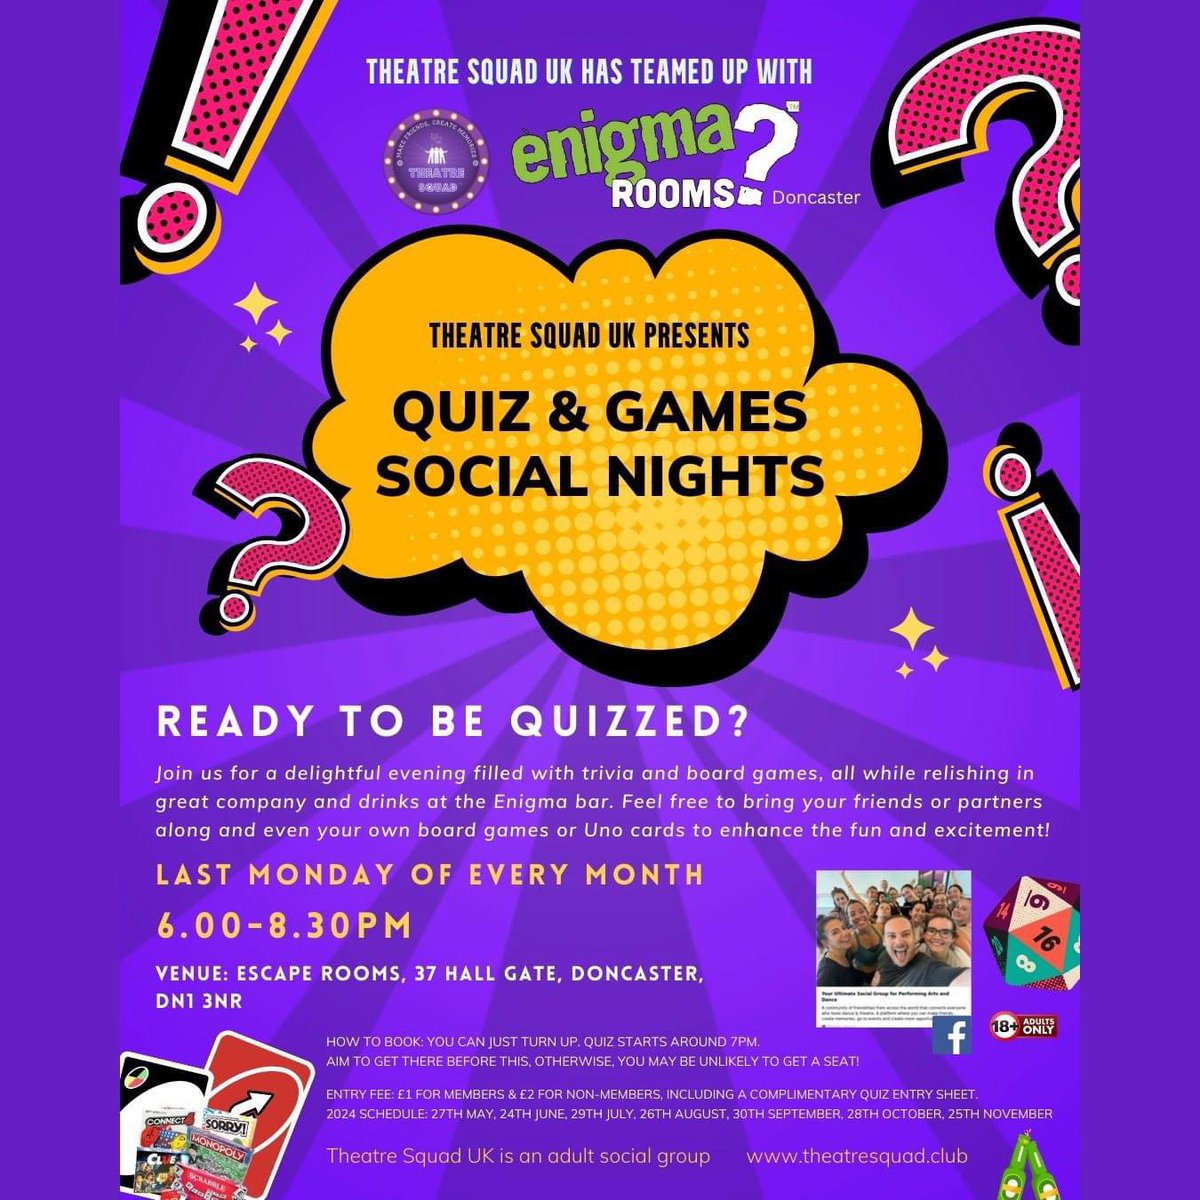 Quiz & Games adult social nights, hosted by Theatre Squad the last Monday of every month. £1 For members £2 for non members #doncasterisgreat #doncaster #quiznight #cityofdoncaster